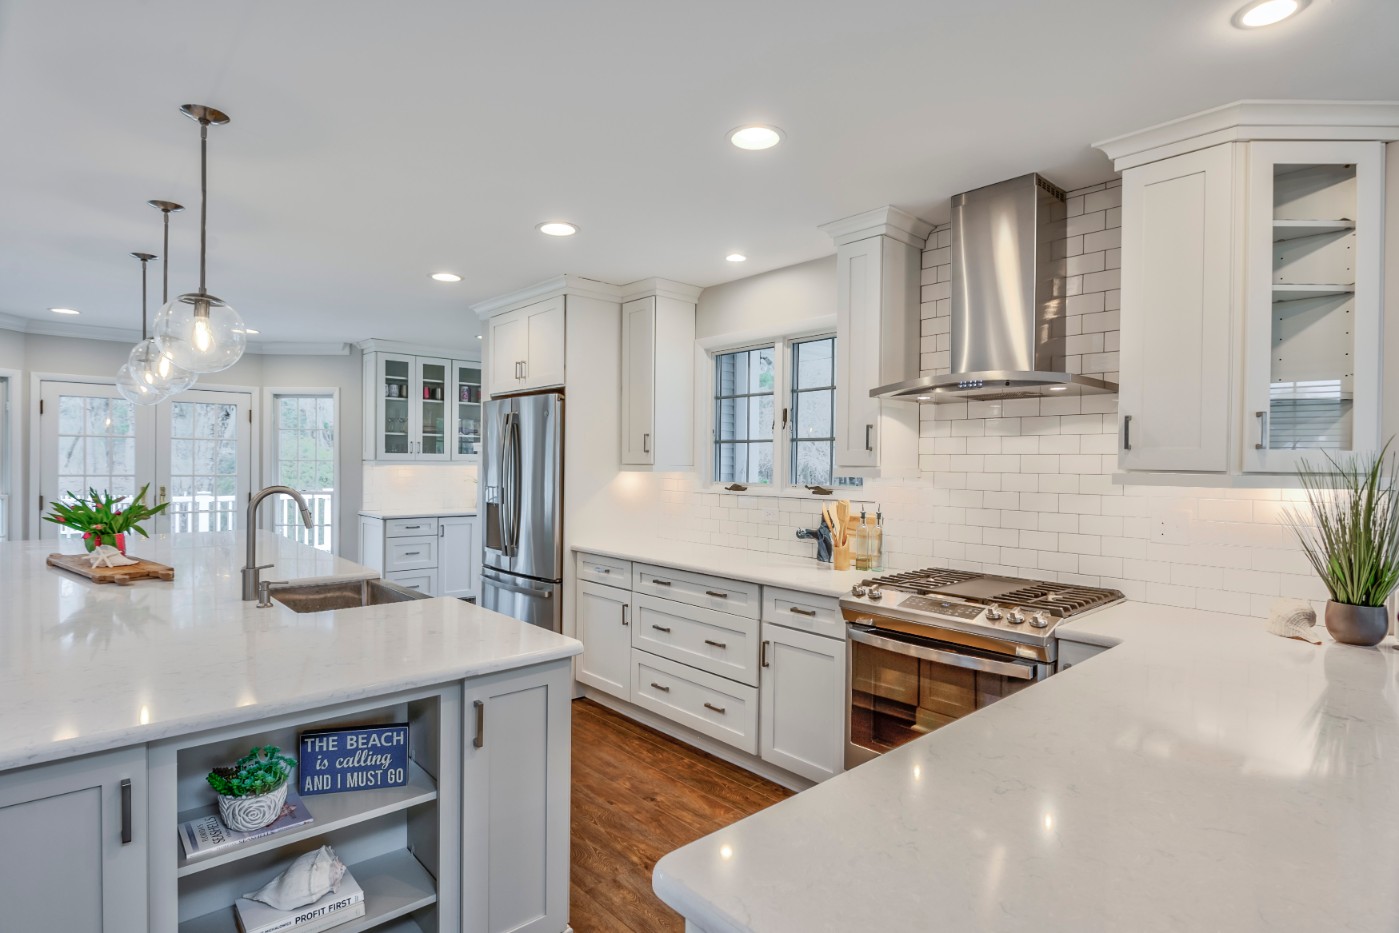 Canal Way Renovation in Bethany Beach DE - Kitchen with White Subway Tile Backsplash and White Cabinets